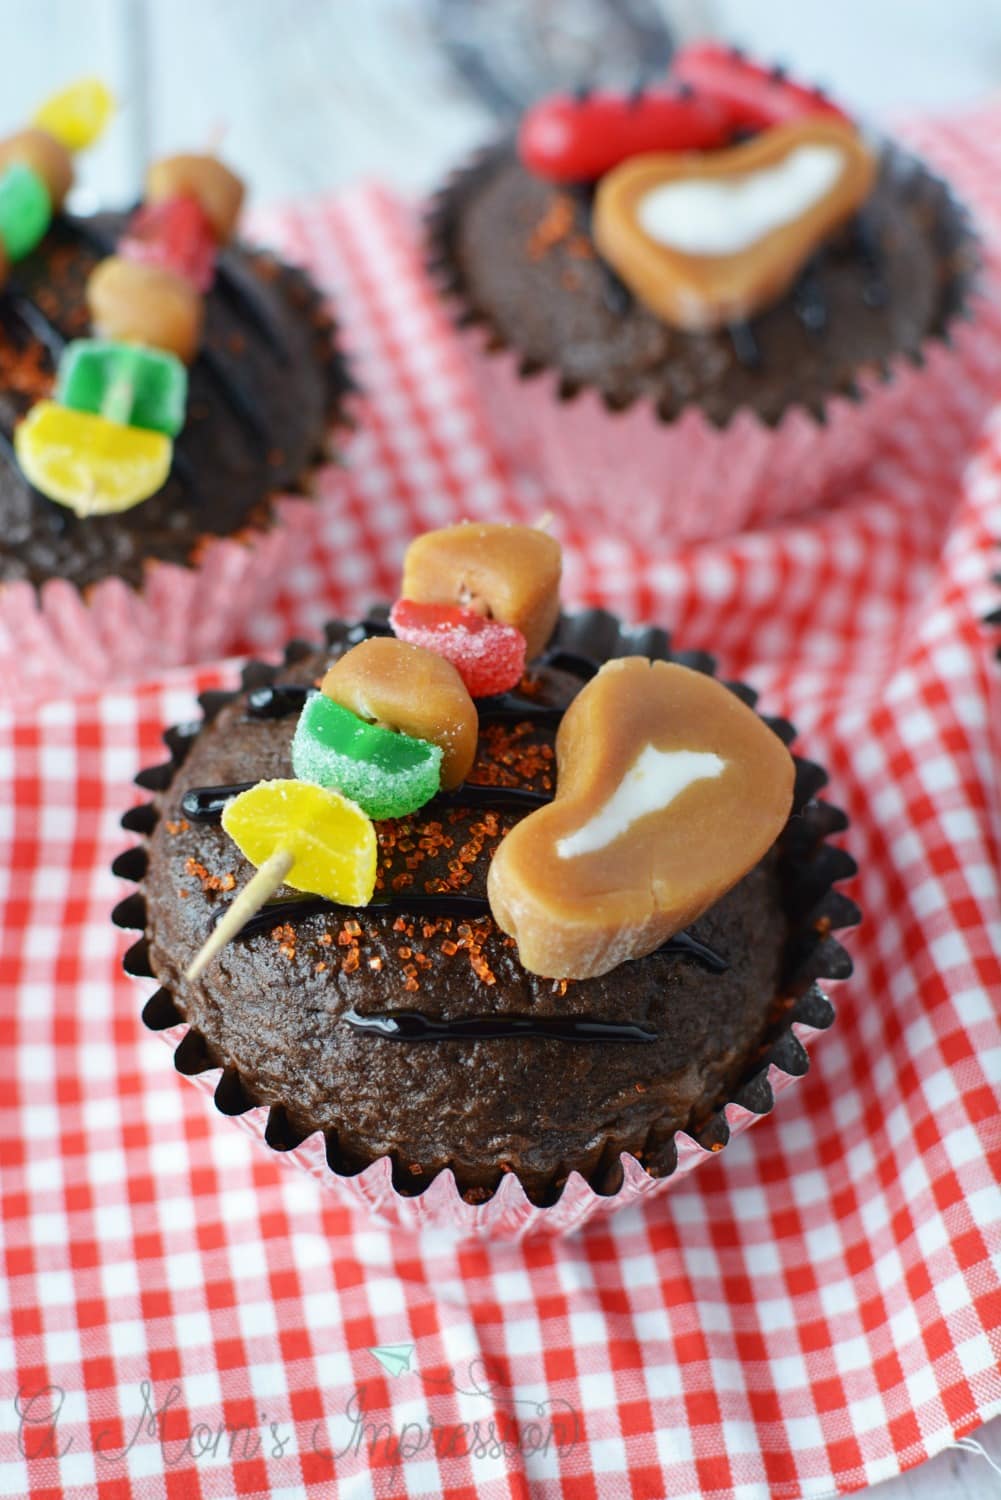 Chocolate Grill cupcakes